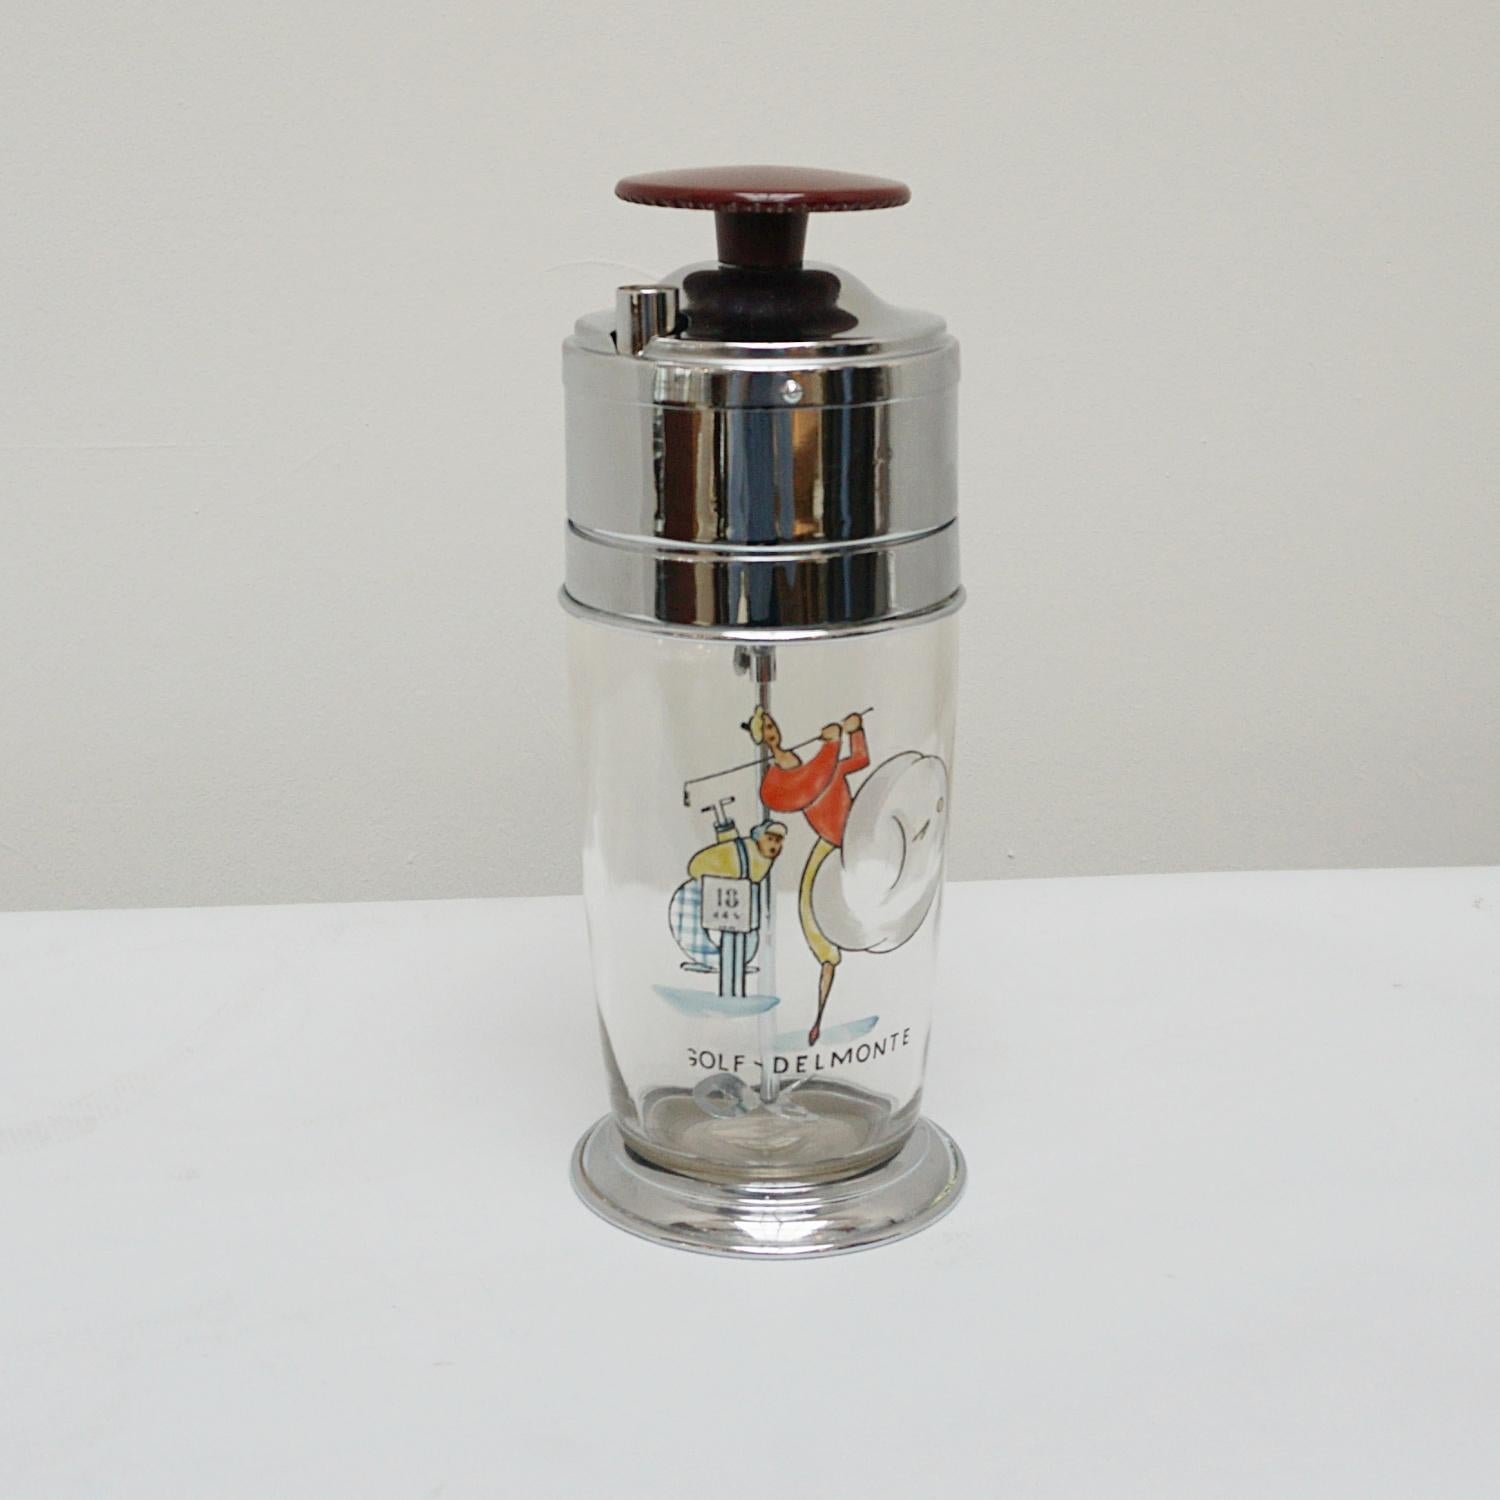 A vintage self mixing cocktail shaker. 'Golf Delmonte' with a cartoon image of a golfer hitting of the 18th tee. Silver plated to bottom and top section with bakelite winding wheel. 

Origin: American

Date: Circa 1950

Item Number: 3003224.